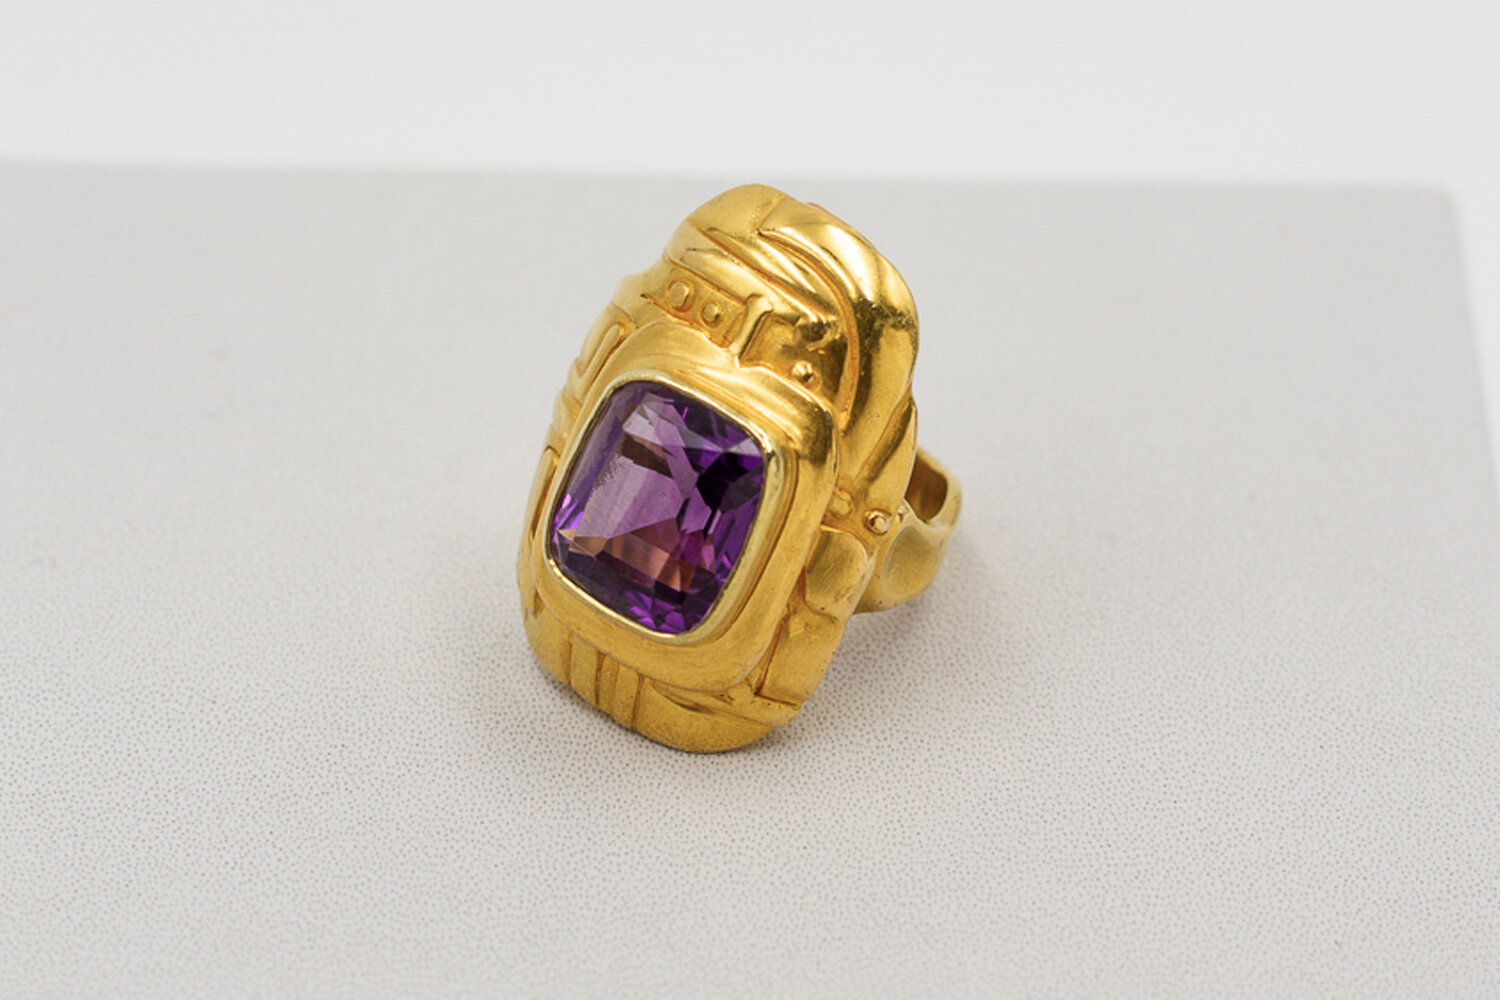 Fernand Demaret : an Abstract Gold and Amethyst ring — COLLECTORS GALLERY